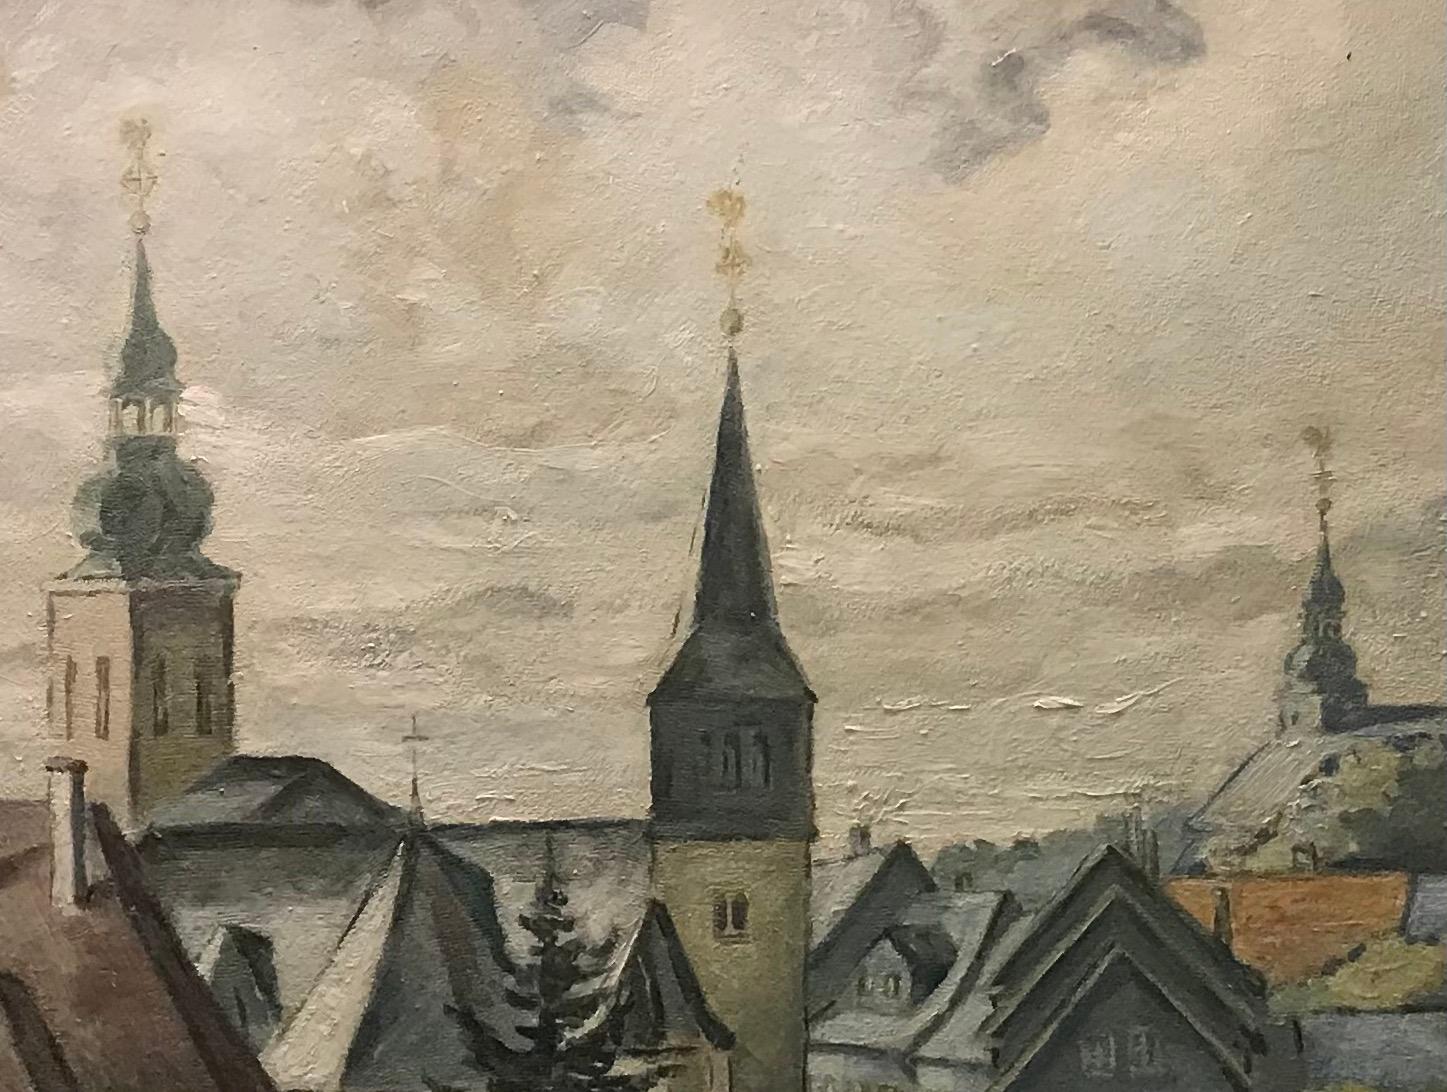 Landscape of a village with a view of steeples - Oil on canvas - Modern Painting by Unknown